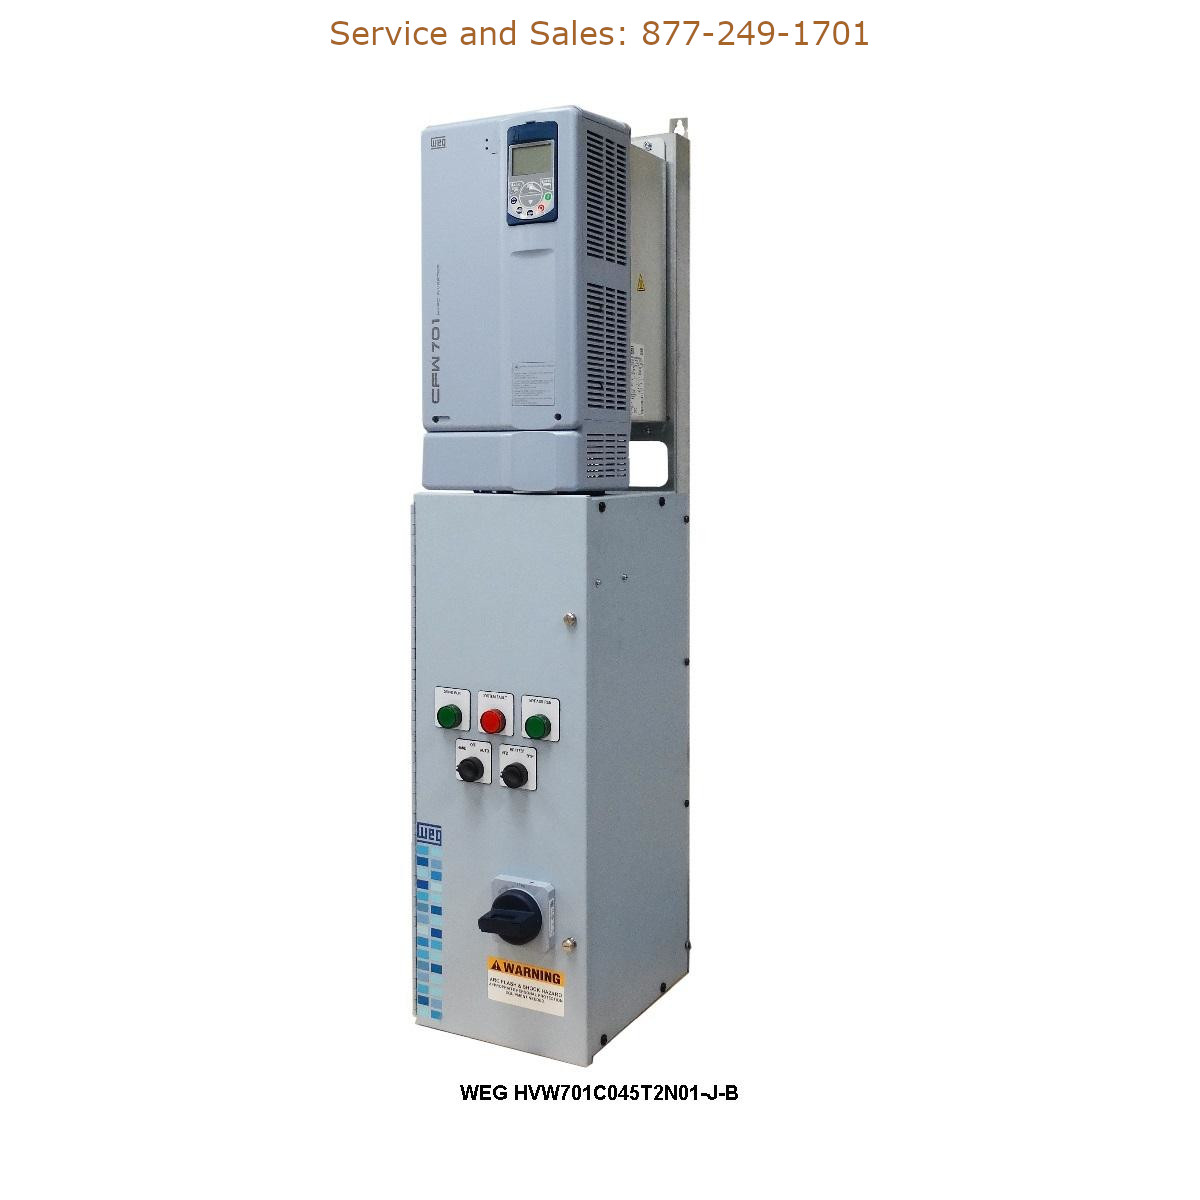 WEG HVW701C045T2N01-J-B WEG Model Number HVW701C045T2N01-J-B WEG Drives, Variable Speed Drives Repair Service, Troubleshooting, Replacement Parts https://gesrepair.com/wp-content/uploads/2022/WEG/WEG_HVW701C045T2N01-J-B_Drives_Variable_Speed_Drives.jpg